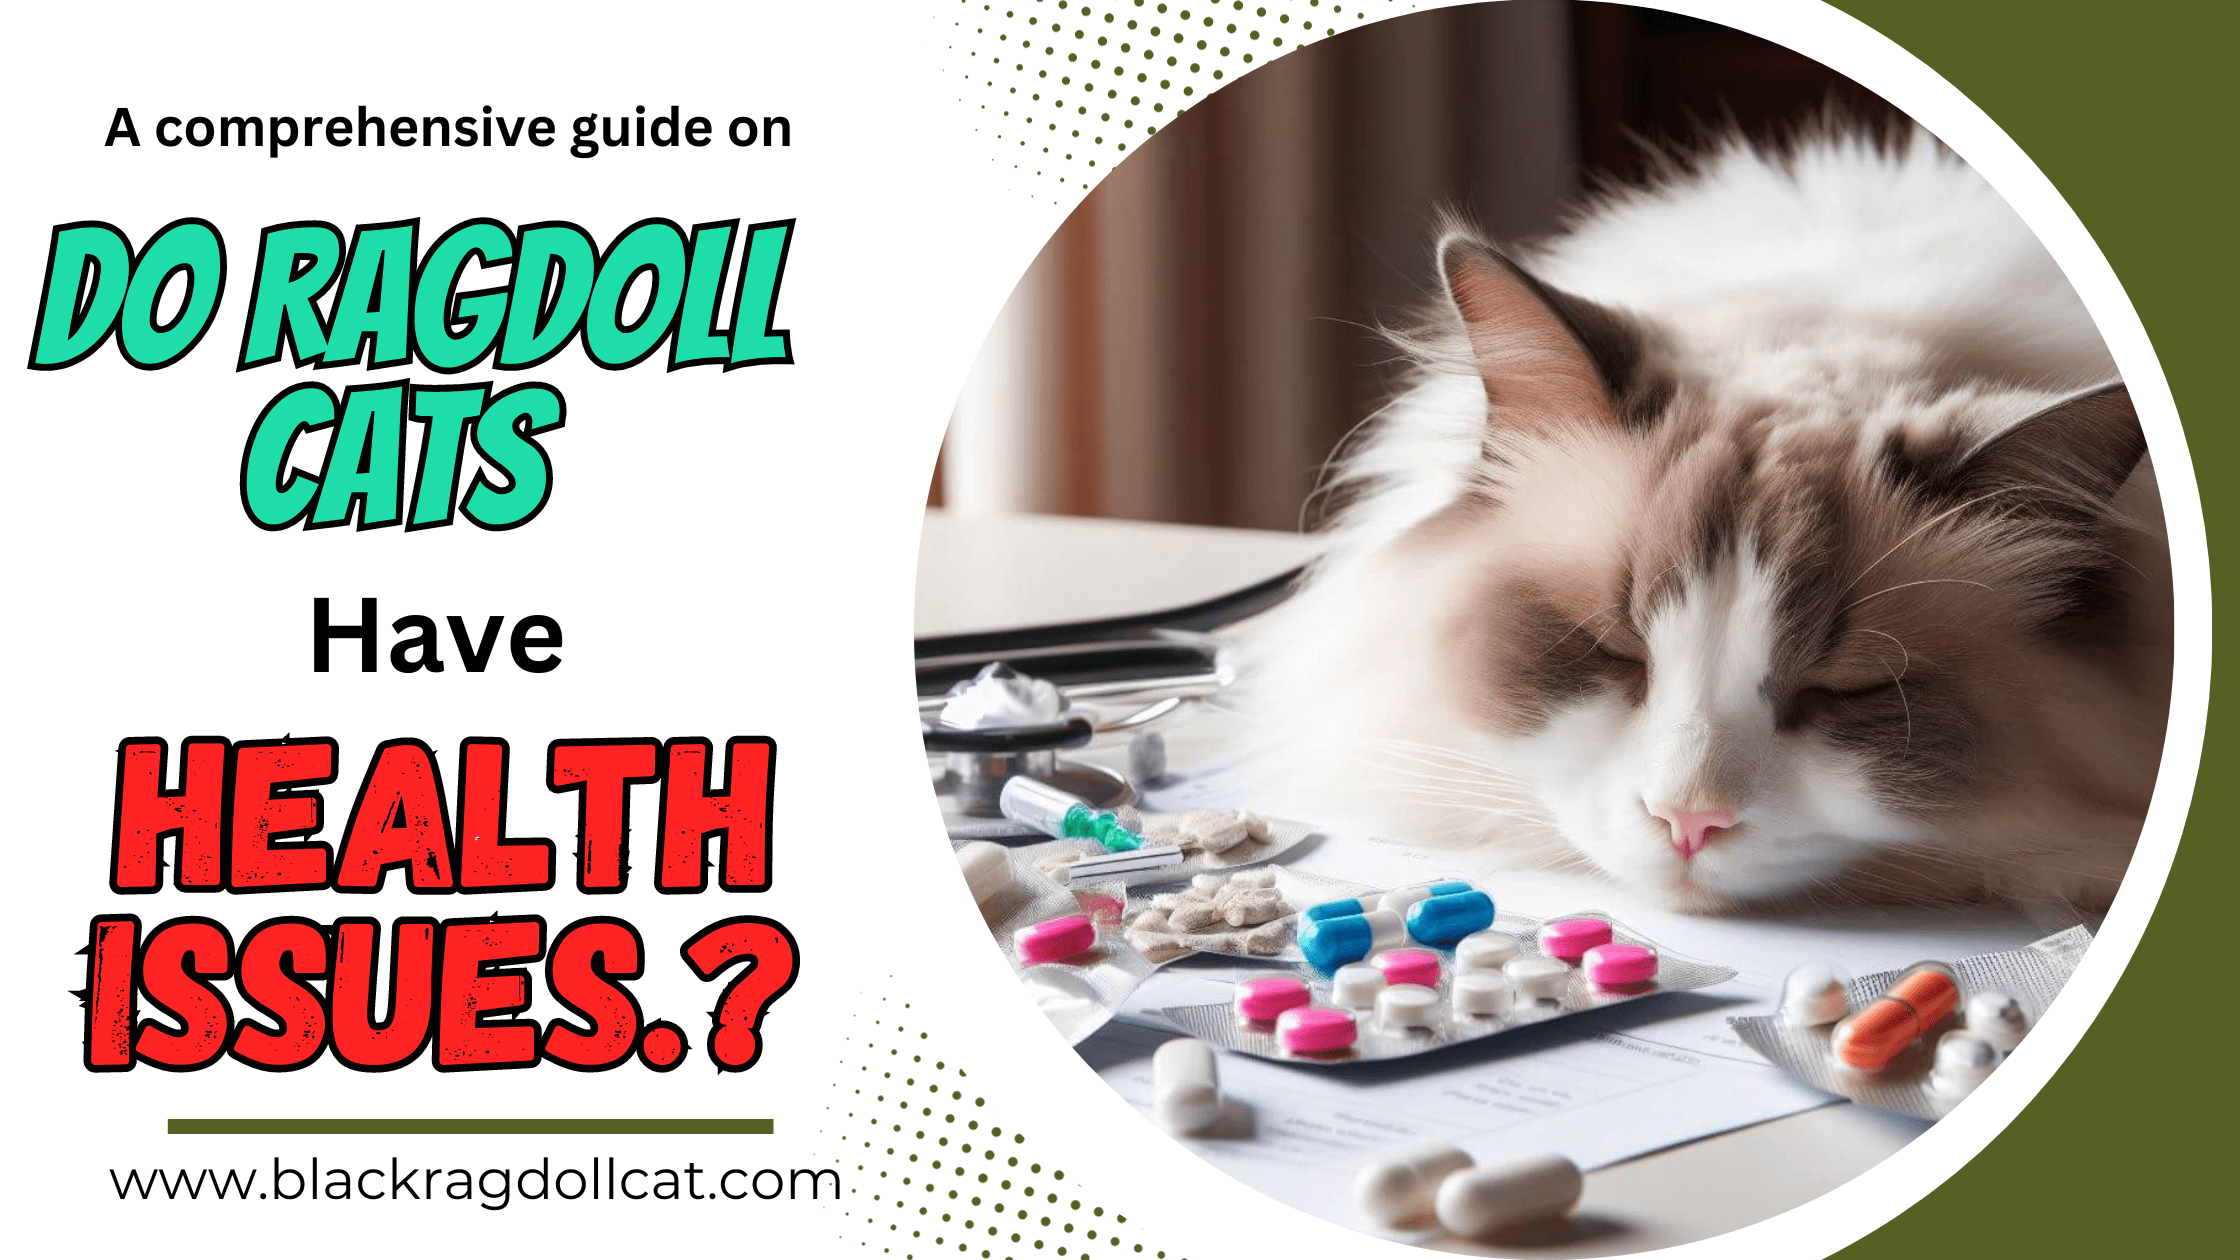 Do ragdoll cats have health issues?